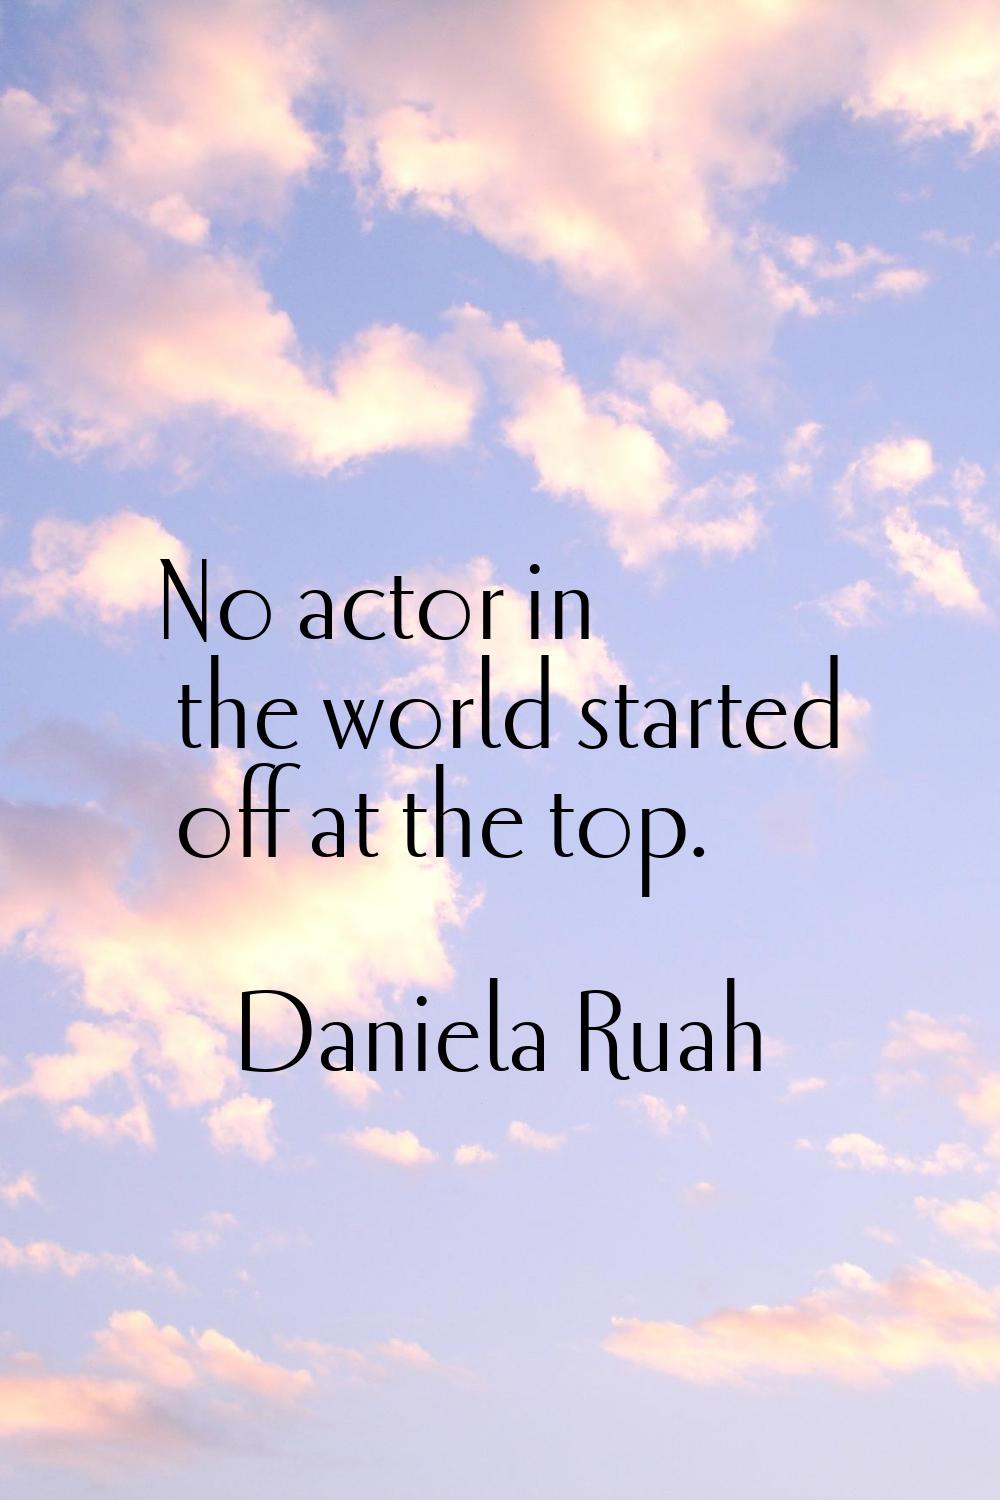 No actor in the world started off at the top.